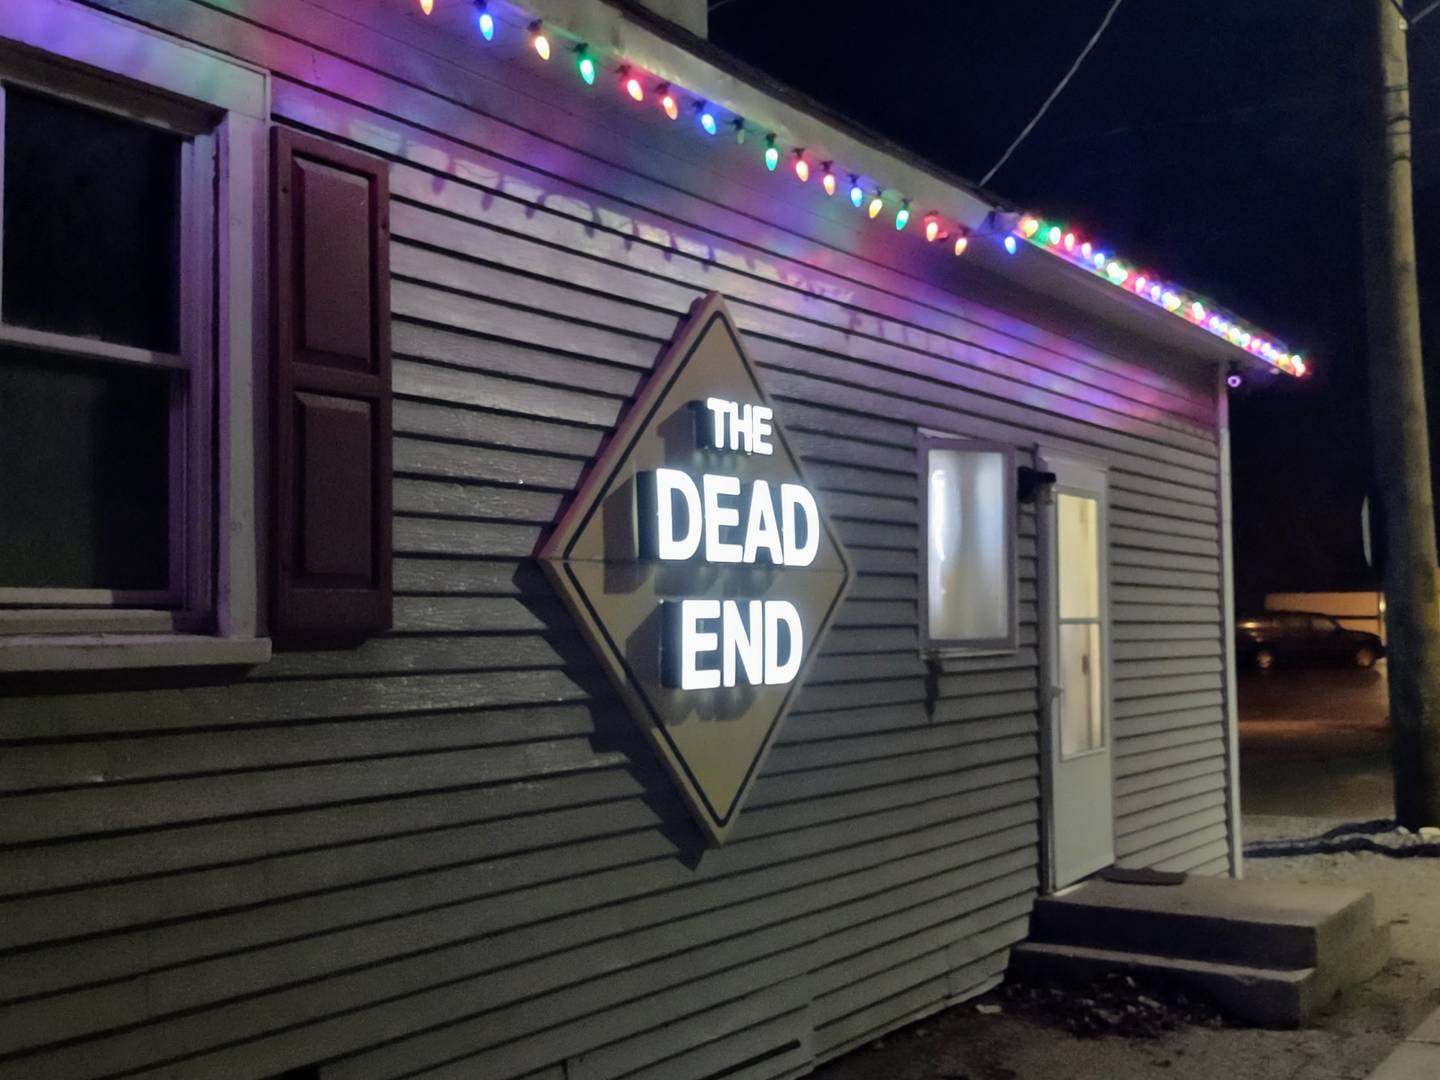 The unassuming entrance to Dead End Bar & Grill, as well as the signage.